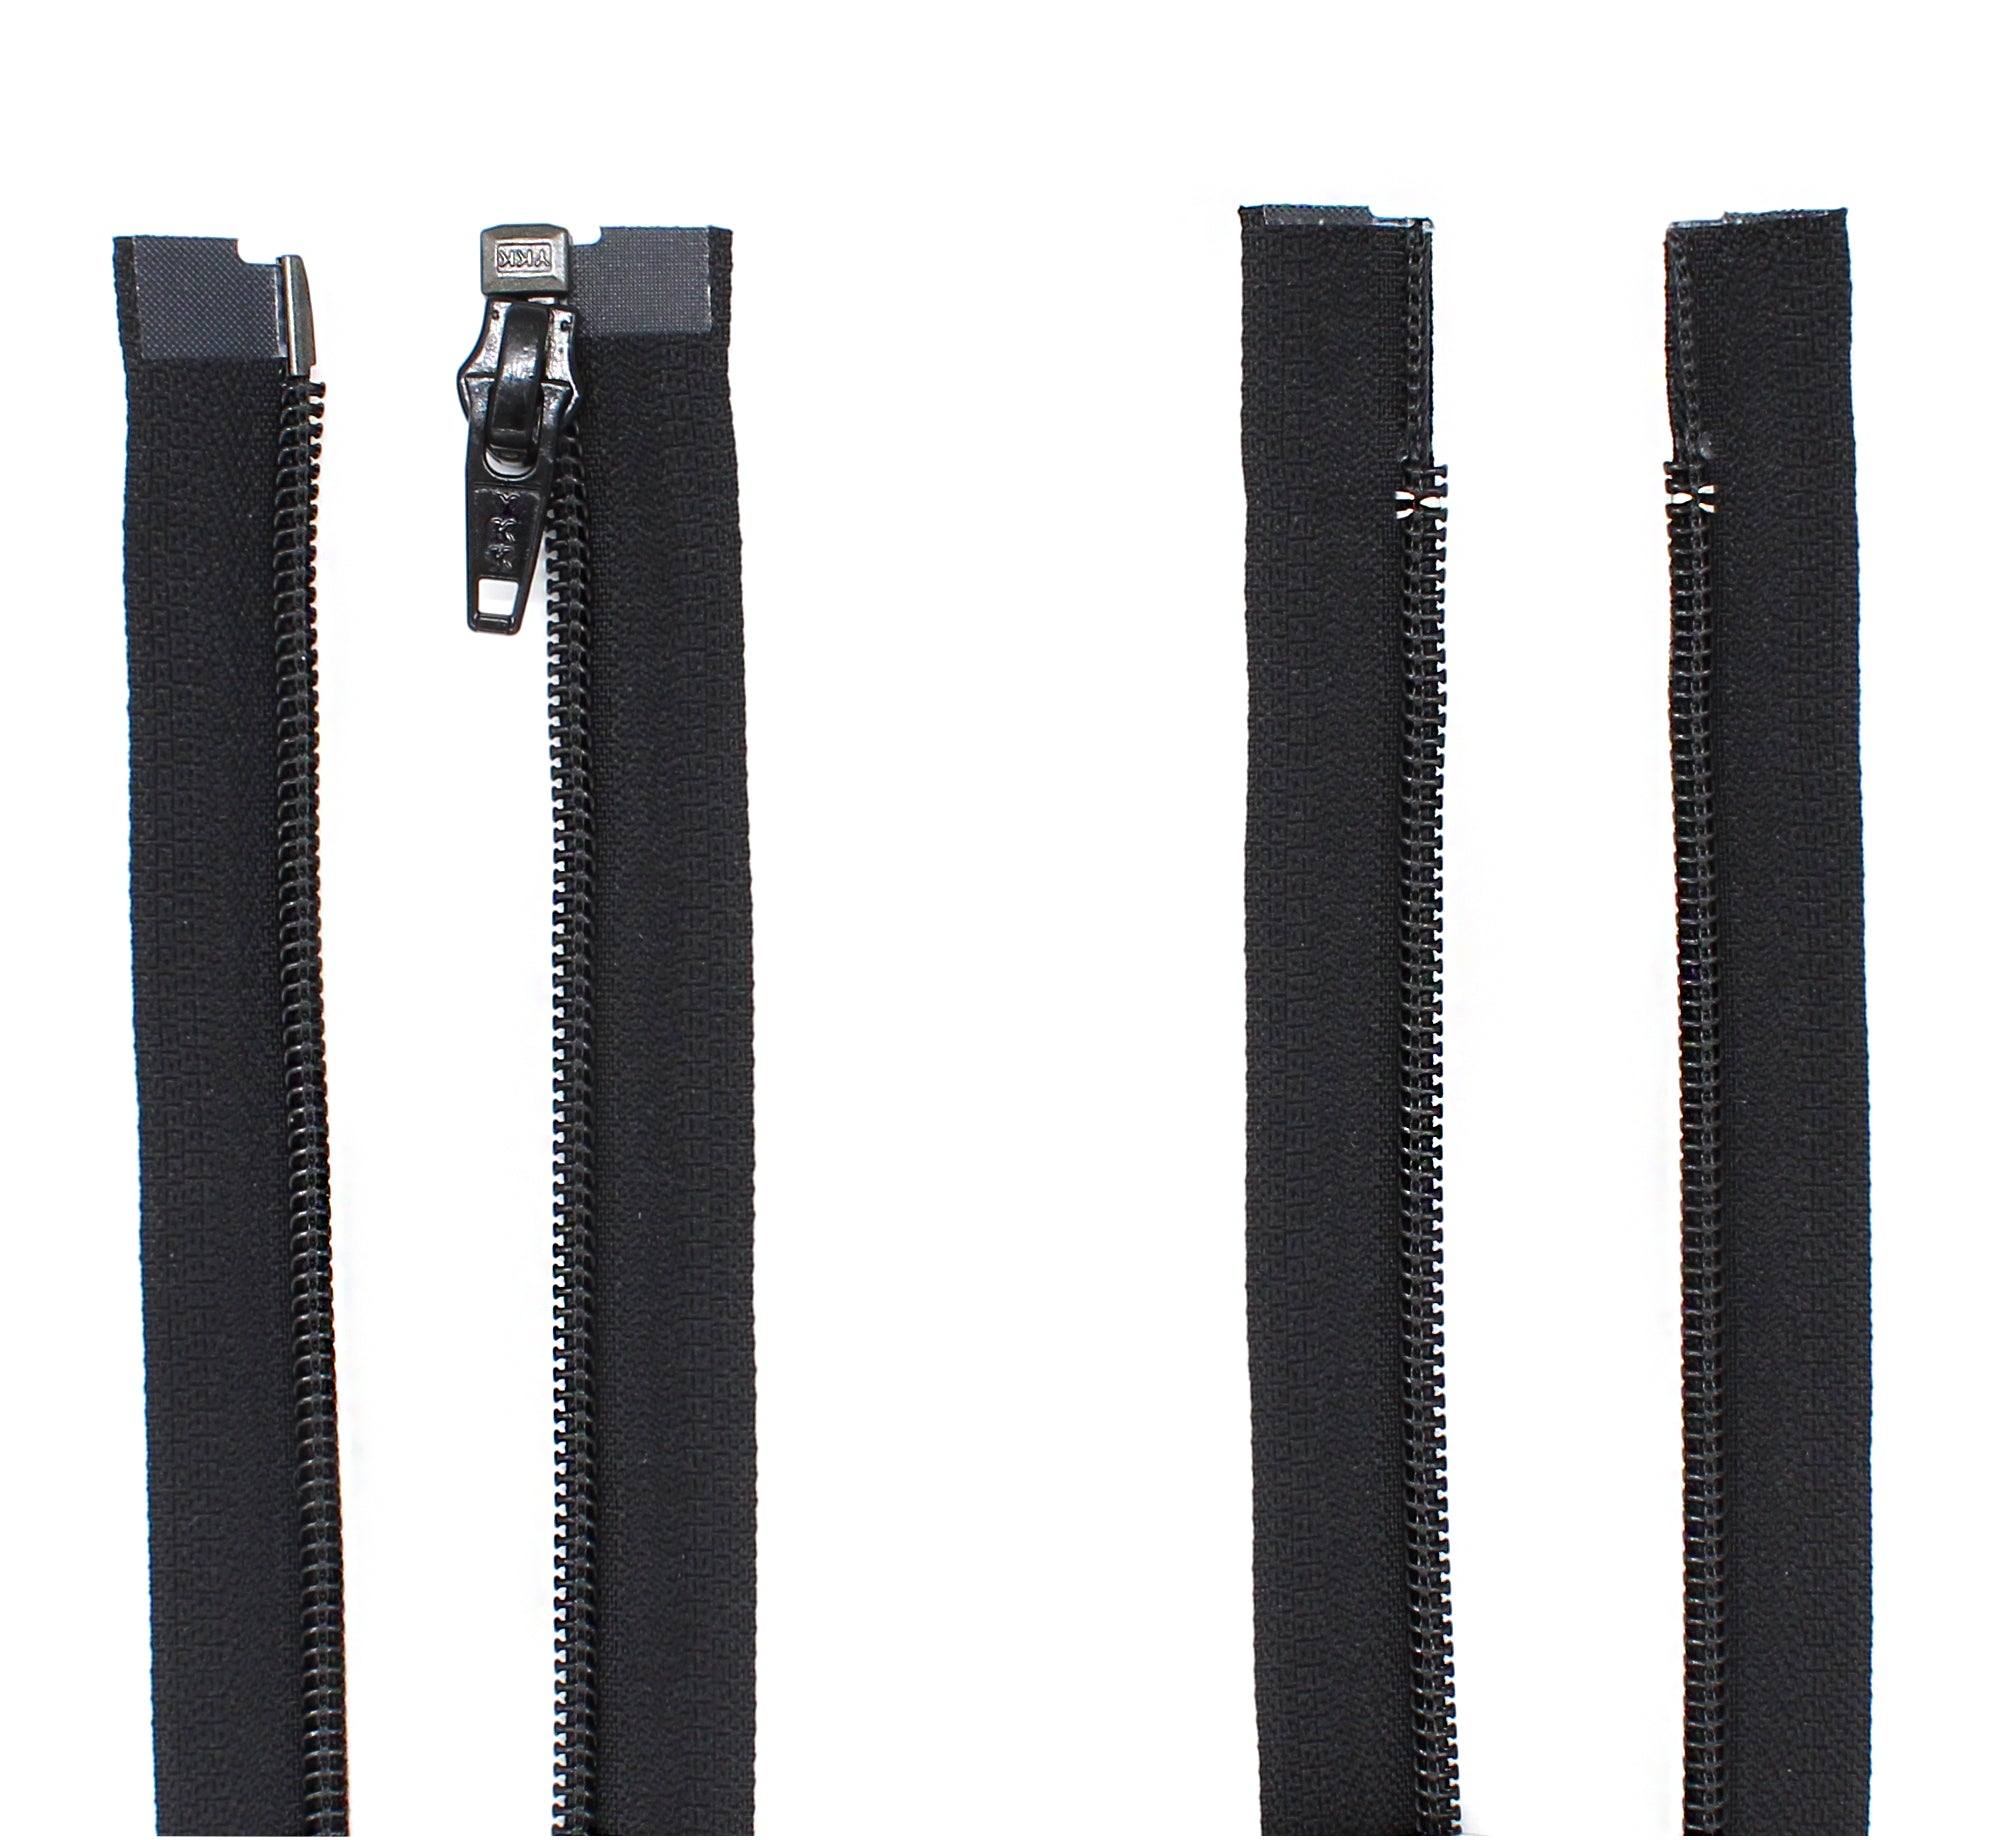  3 PCS #5 27 Inch Separating Zippers for Sewing